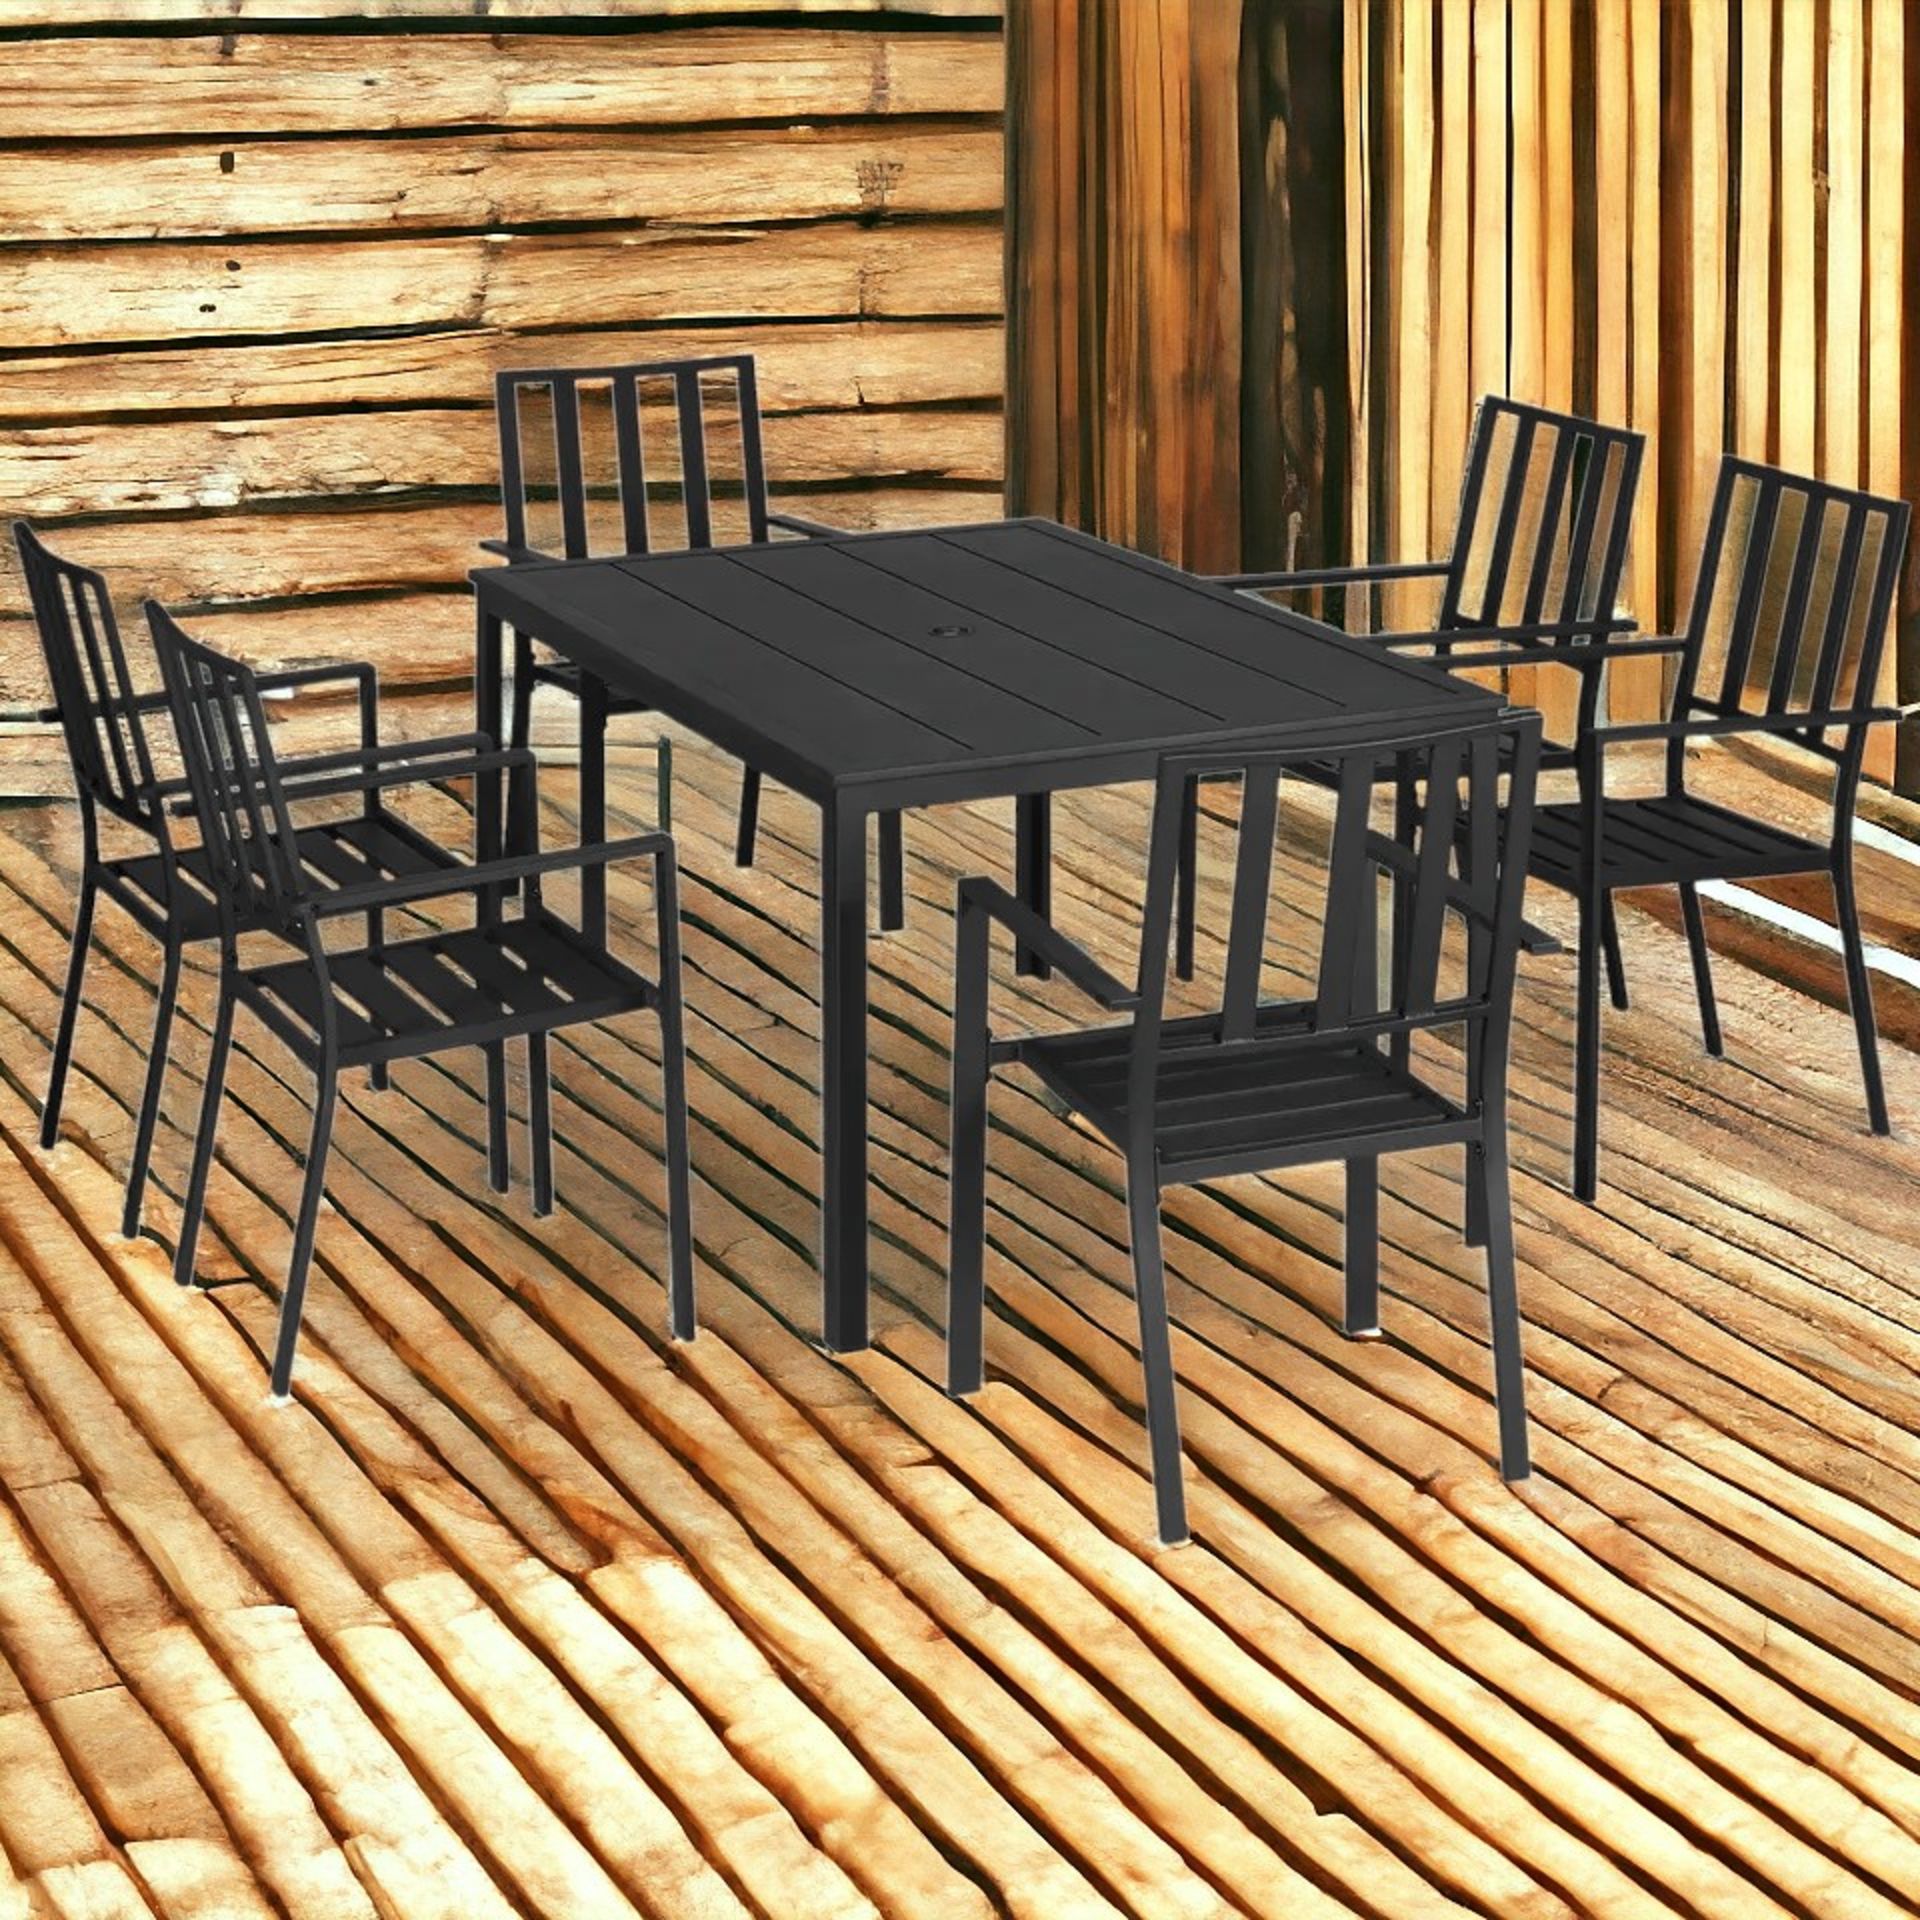 FREE DELIVERY - BRAND NEW 7 PCS GARDEN DINING SET W/ STACKABLE CHAIRS AND METAL TOP TABLE, BLACK - Image 2 of 2